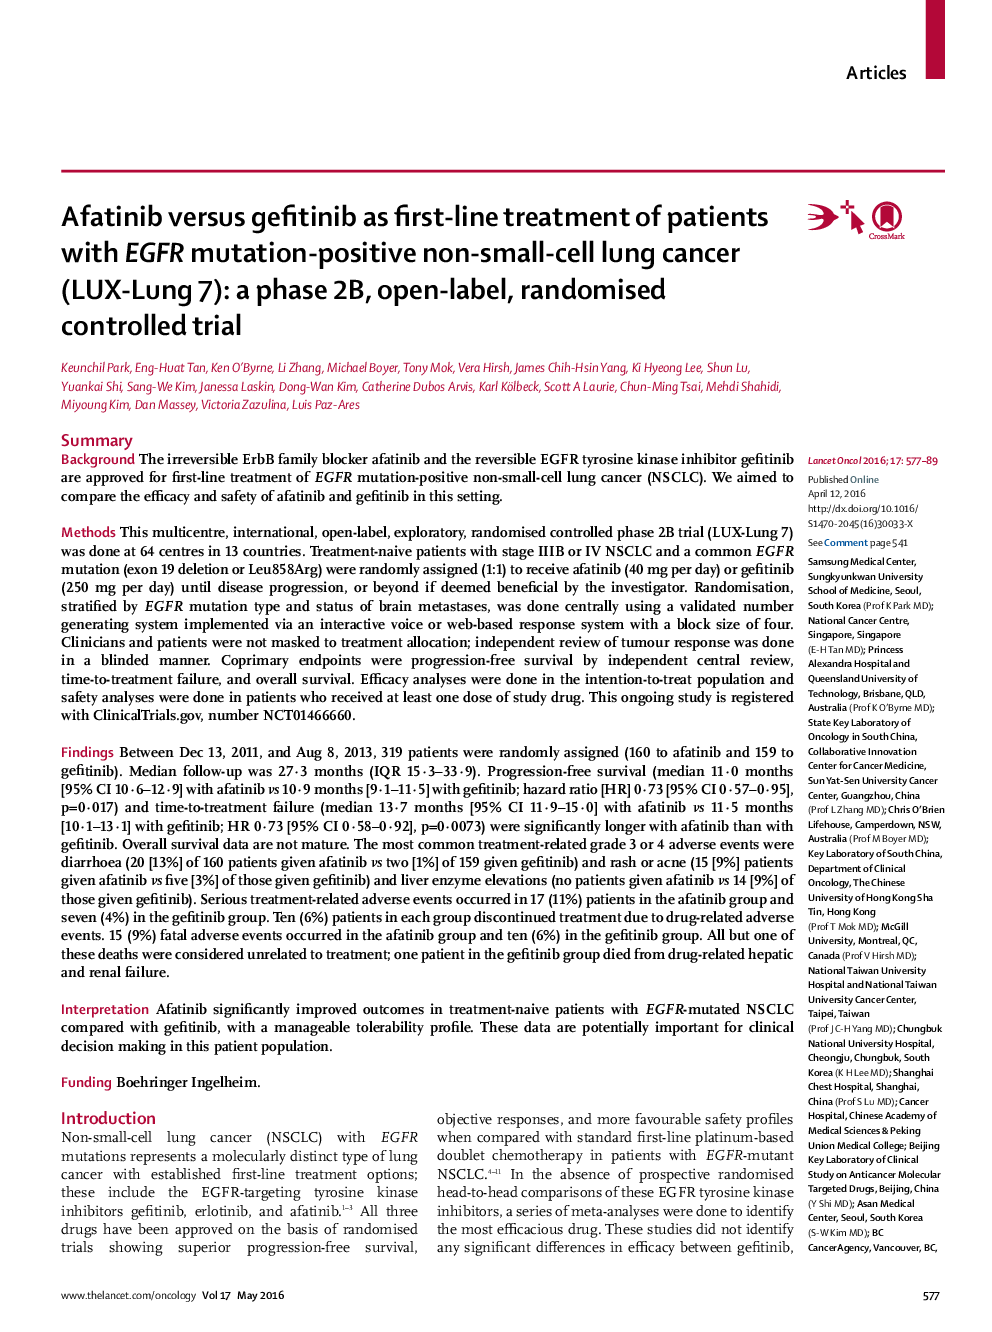 Afatinib versus gefitinib as first-line treatment of patients with EGFR mutation-positive non-small-cell lung cancer (LUX-Lung 7): a phase 2B, open-label, randomised controlled trial